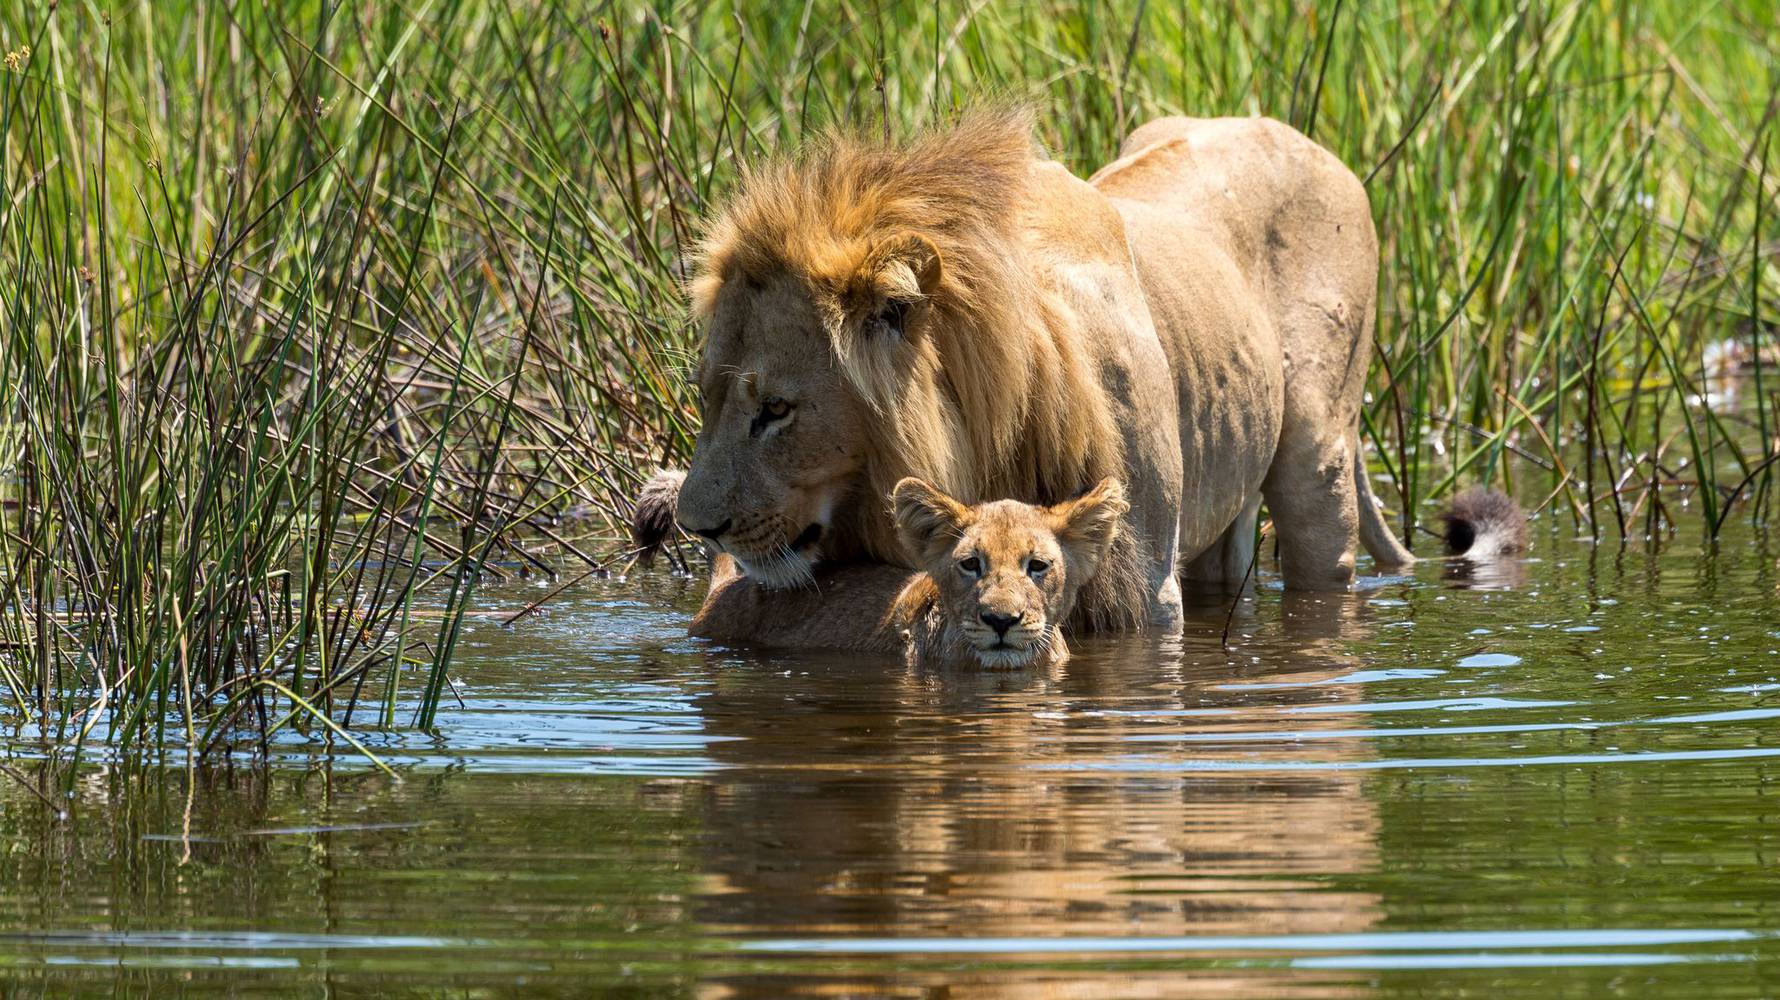 Lion_with_cub_in_water_L